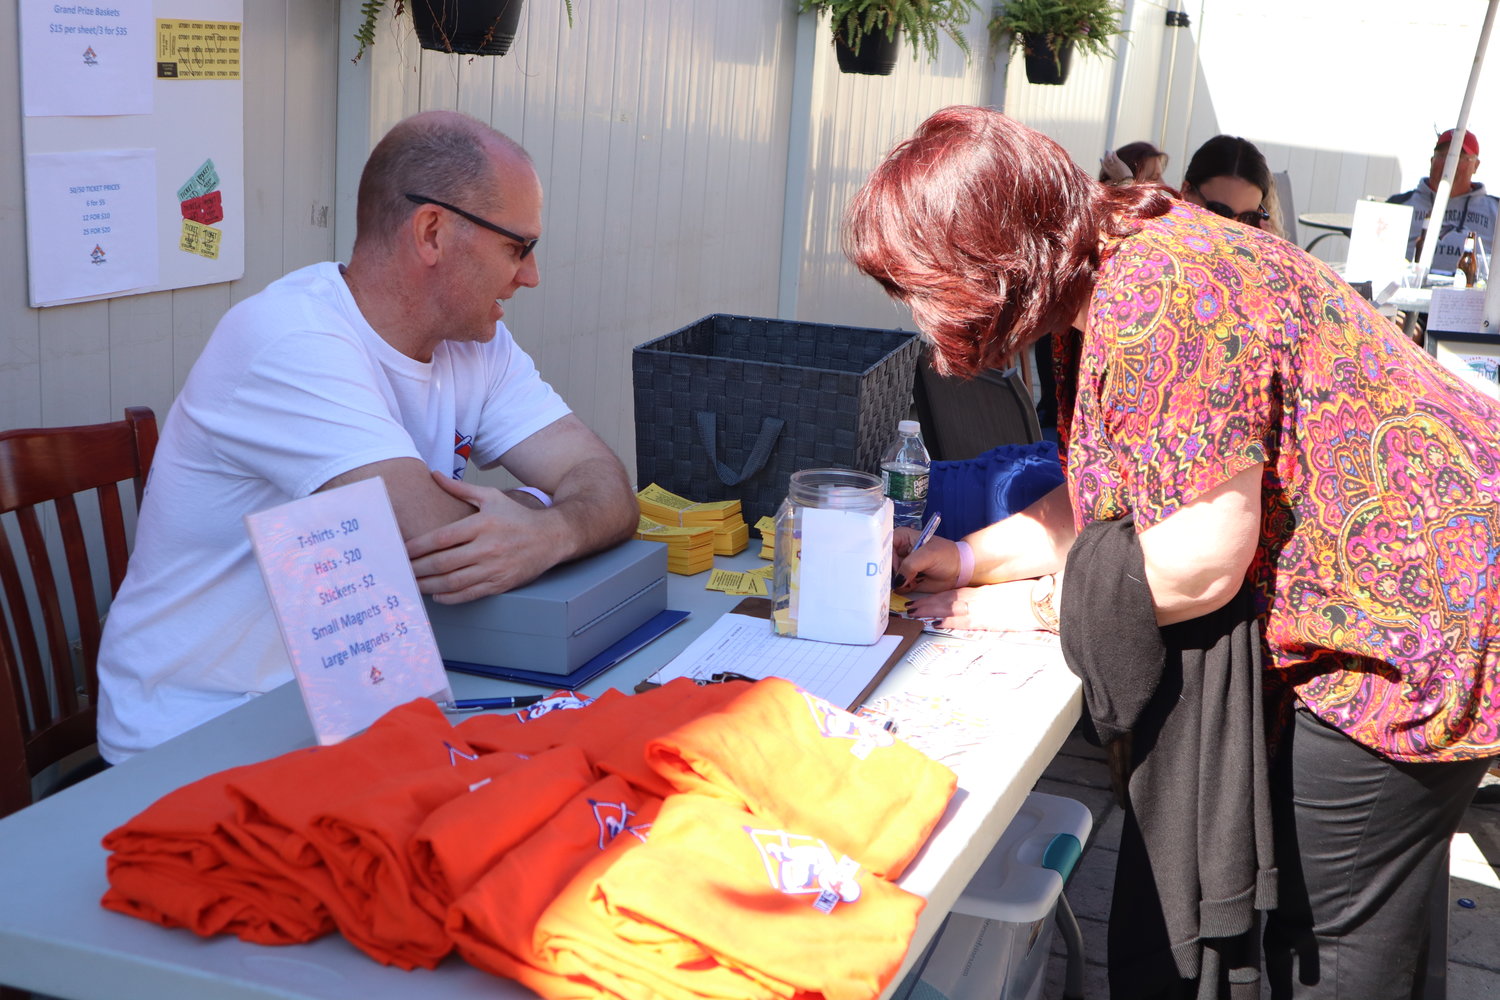 George Biegner sells merchandise and raffle tickets to help raise money for charity.